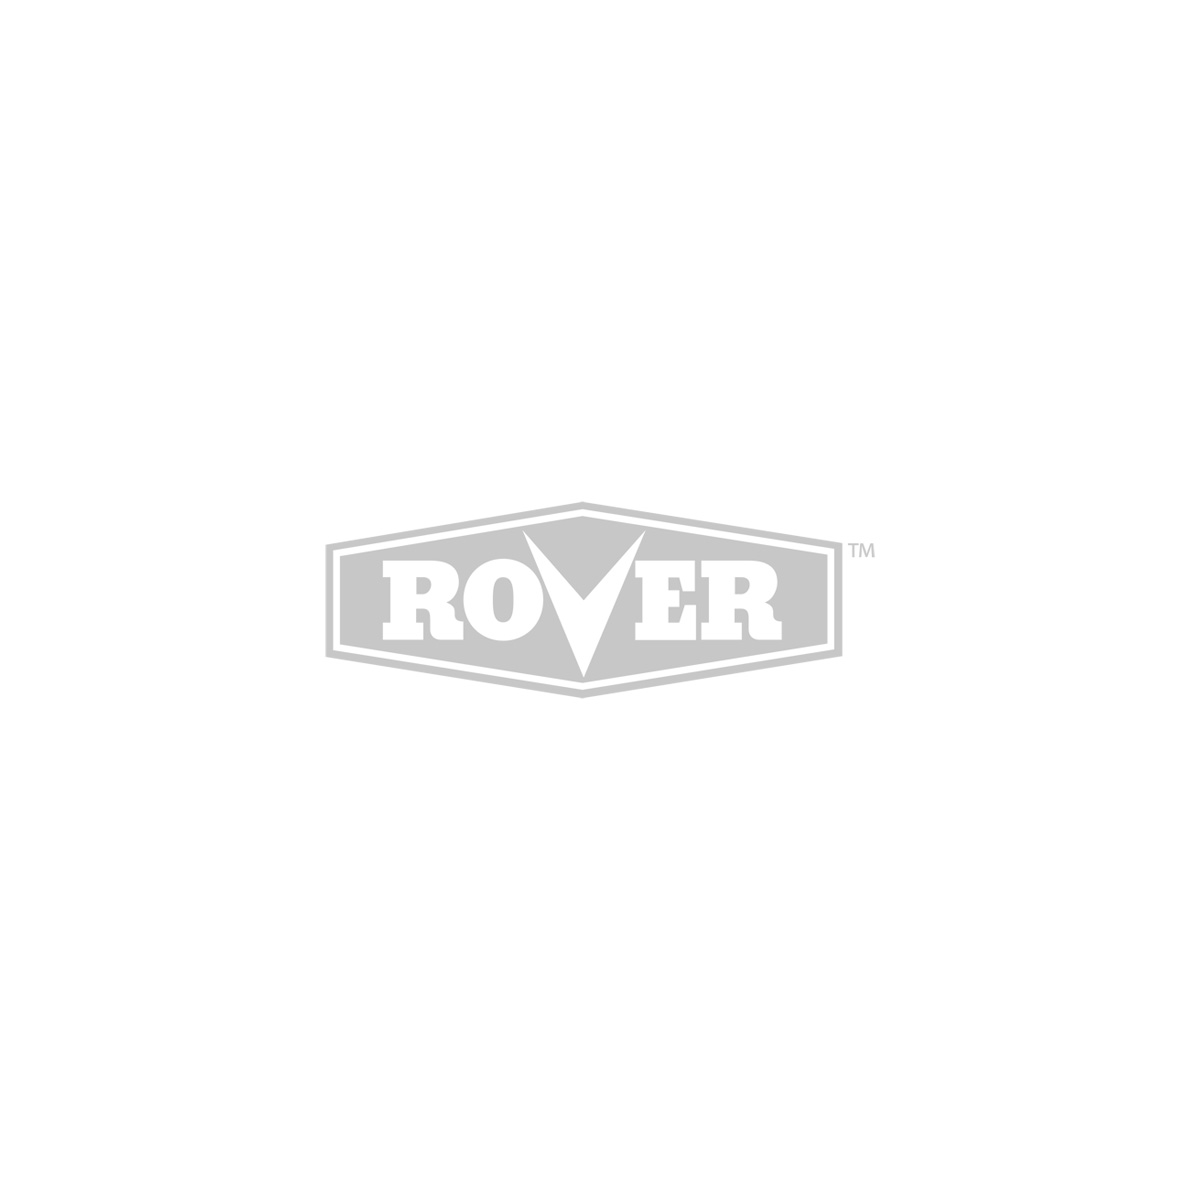 Rover Endeavour Self Propelled Lawn Mower